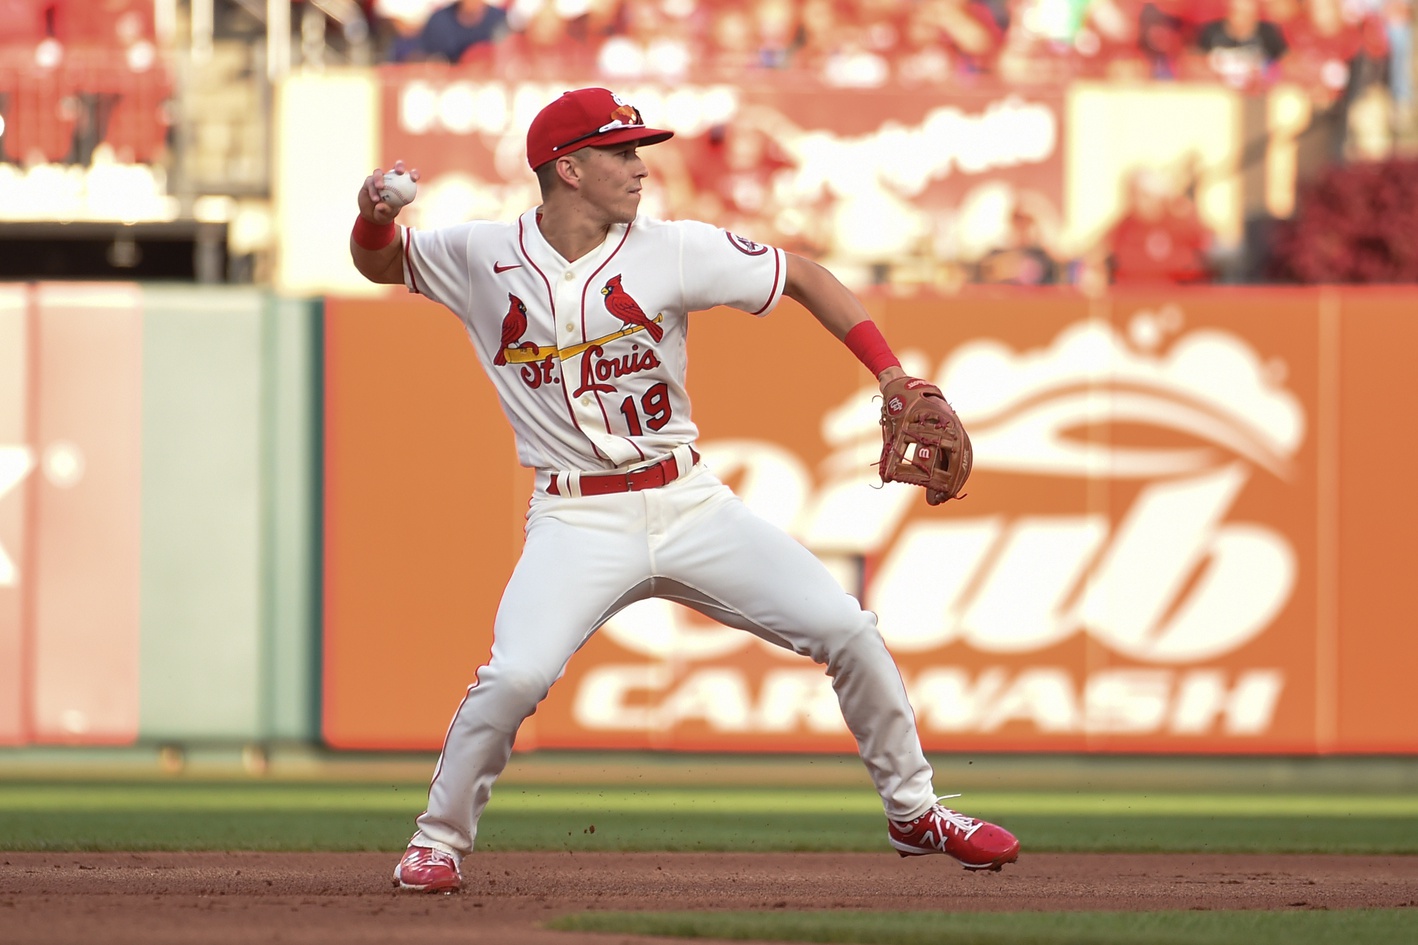 St. Louis Cardinals vs Pittsburgh Pirates Prediction, 8/26/2021 MLB Pick,  Tips and Odds